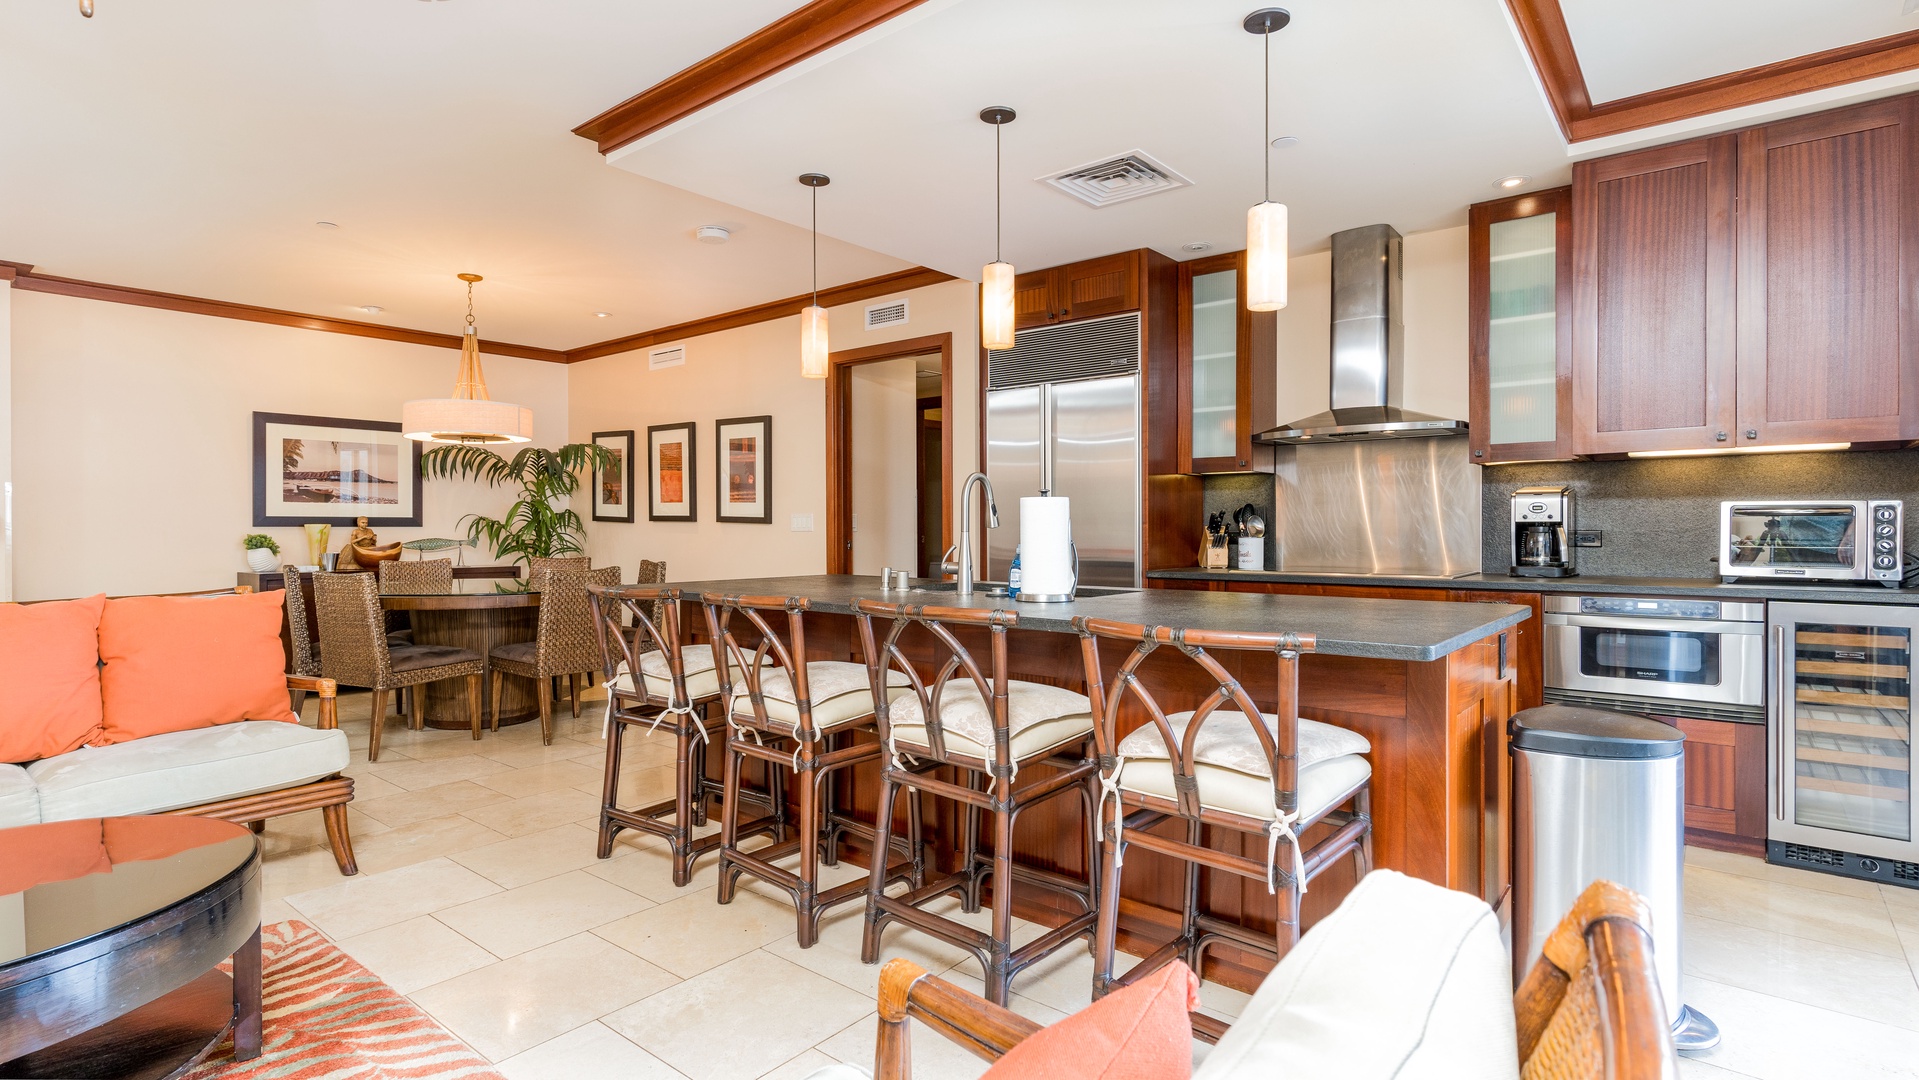 Kapolei Vacation Rentals, Ko Olina Beach Villas O521 - You will have bar seating and an open floor plan for entertaining.